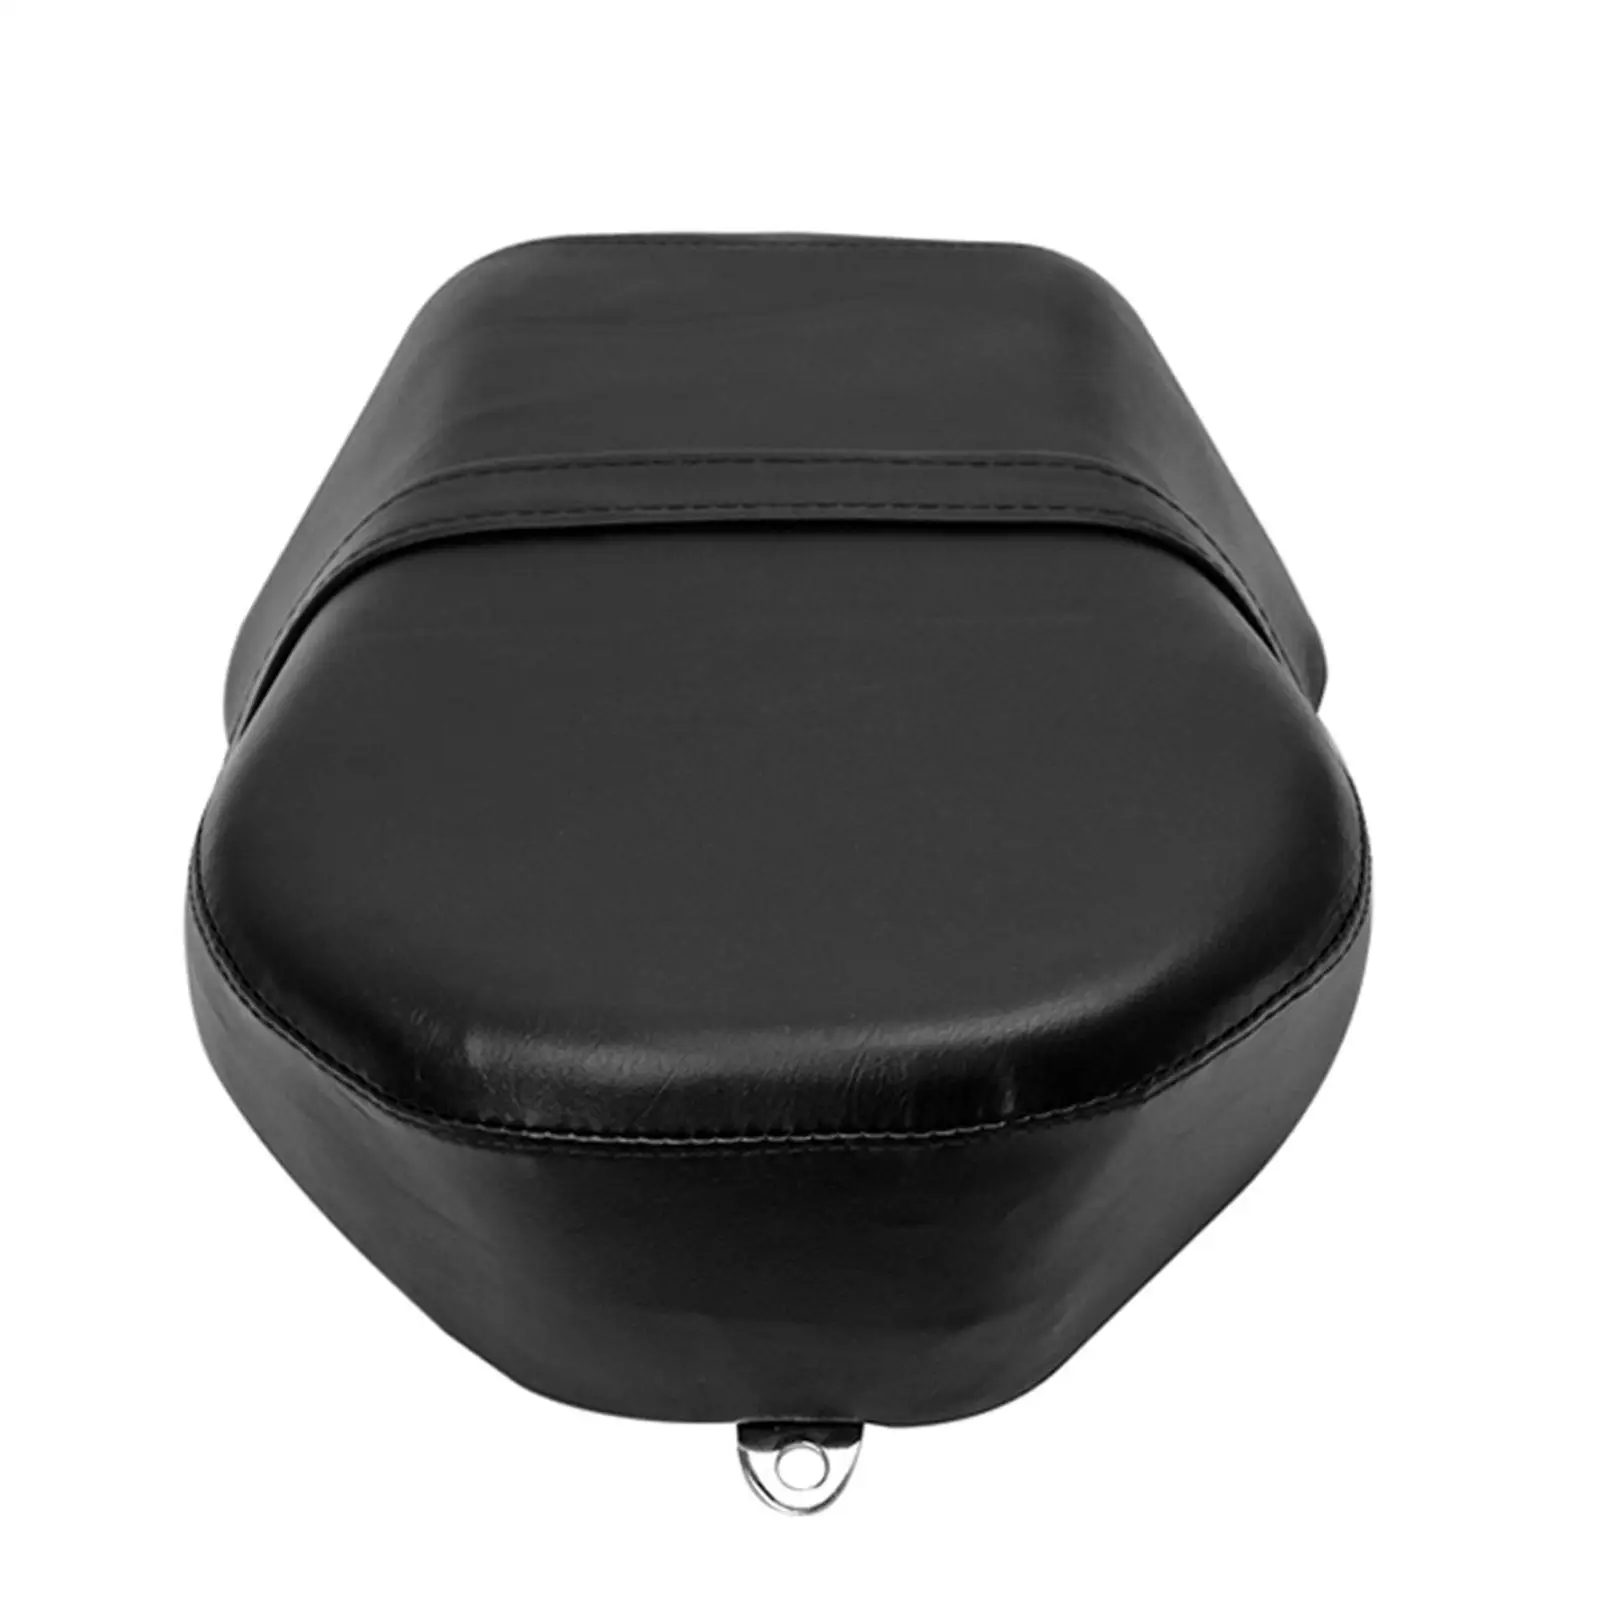 Motorcycle Pillion Passenger Pad Seat for Harley Sportster Durable